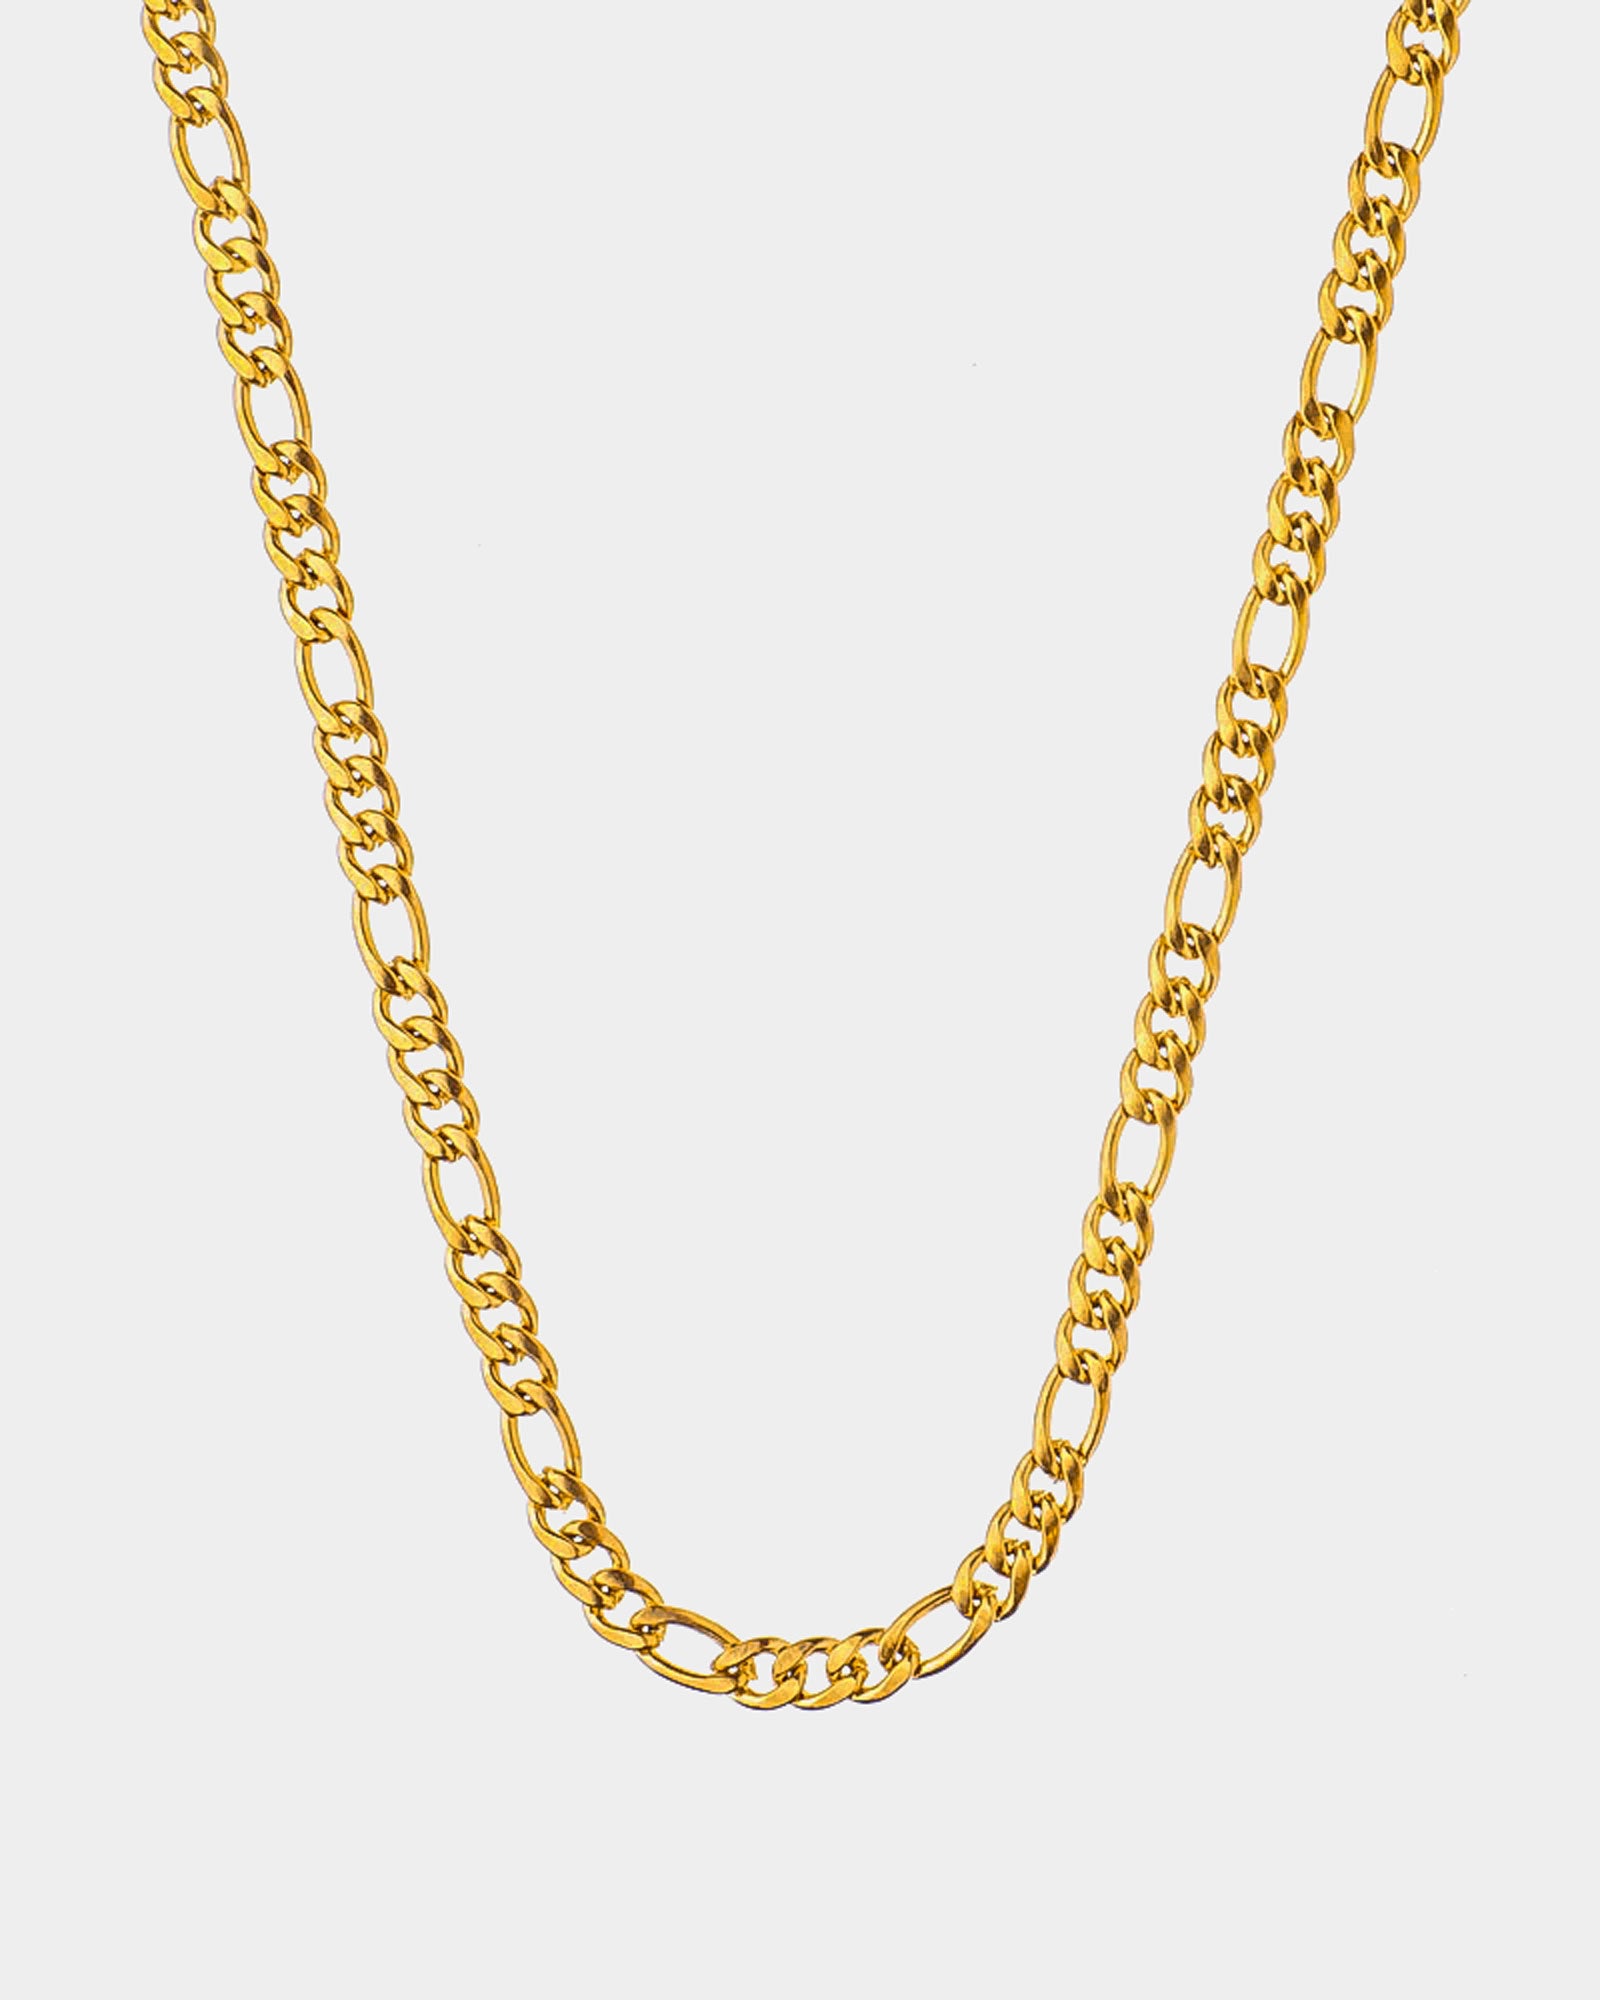 Namibia - Golden Steel Necklace 'Namibia' - Golden Chain - Online Unissex Jewelry - Dicci